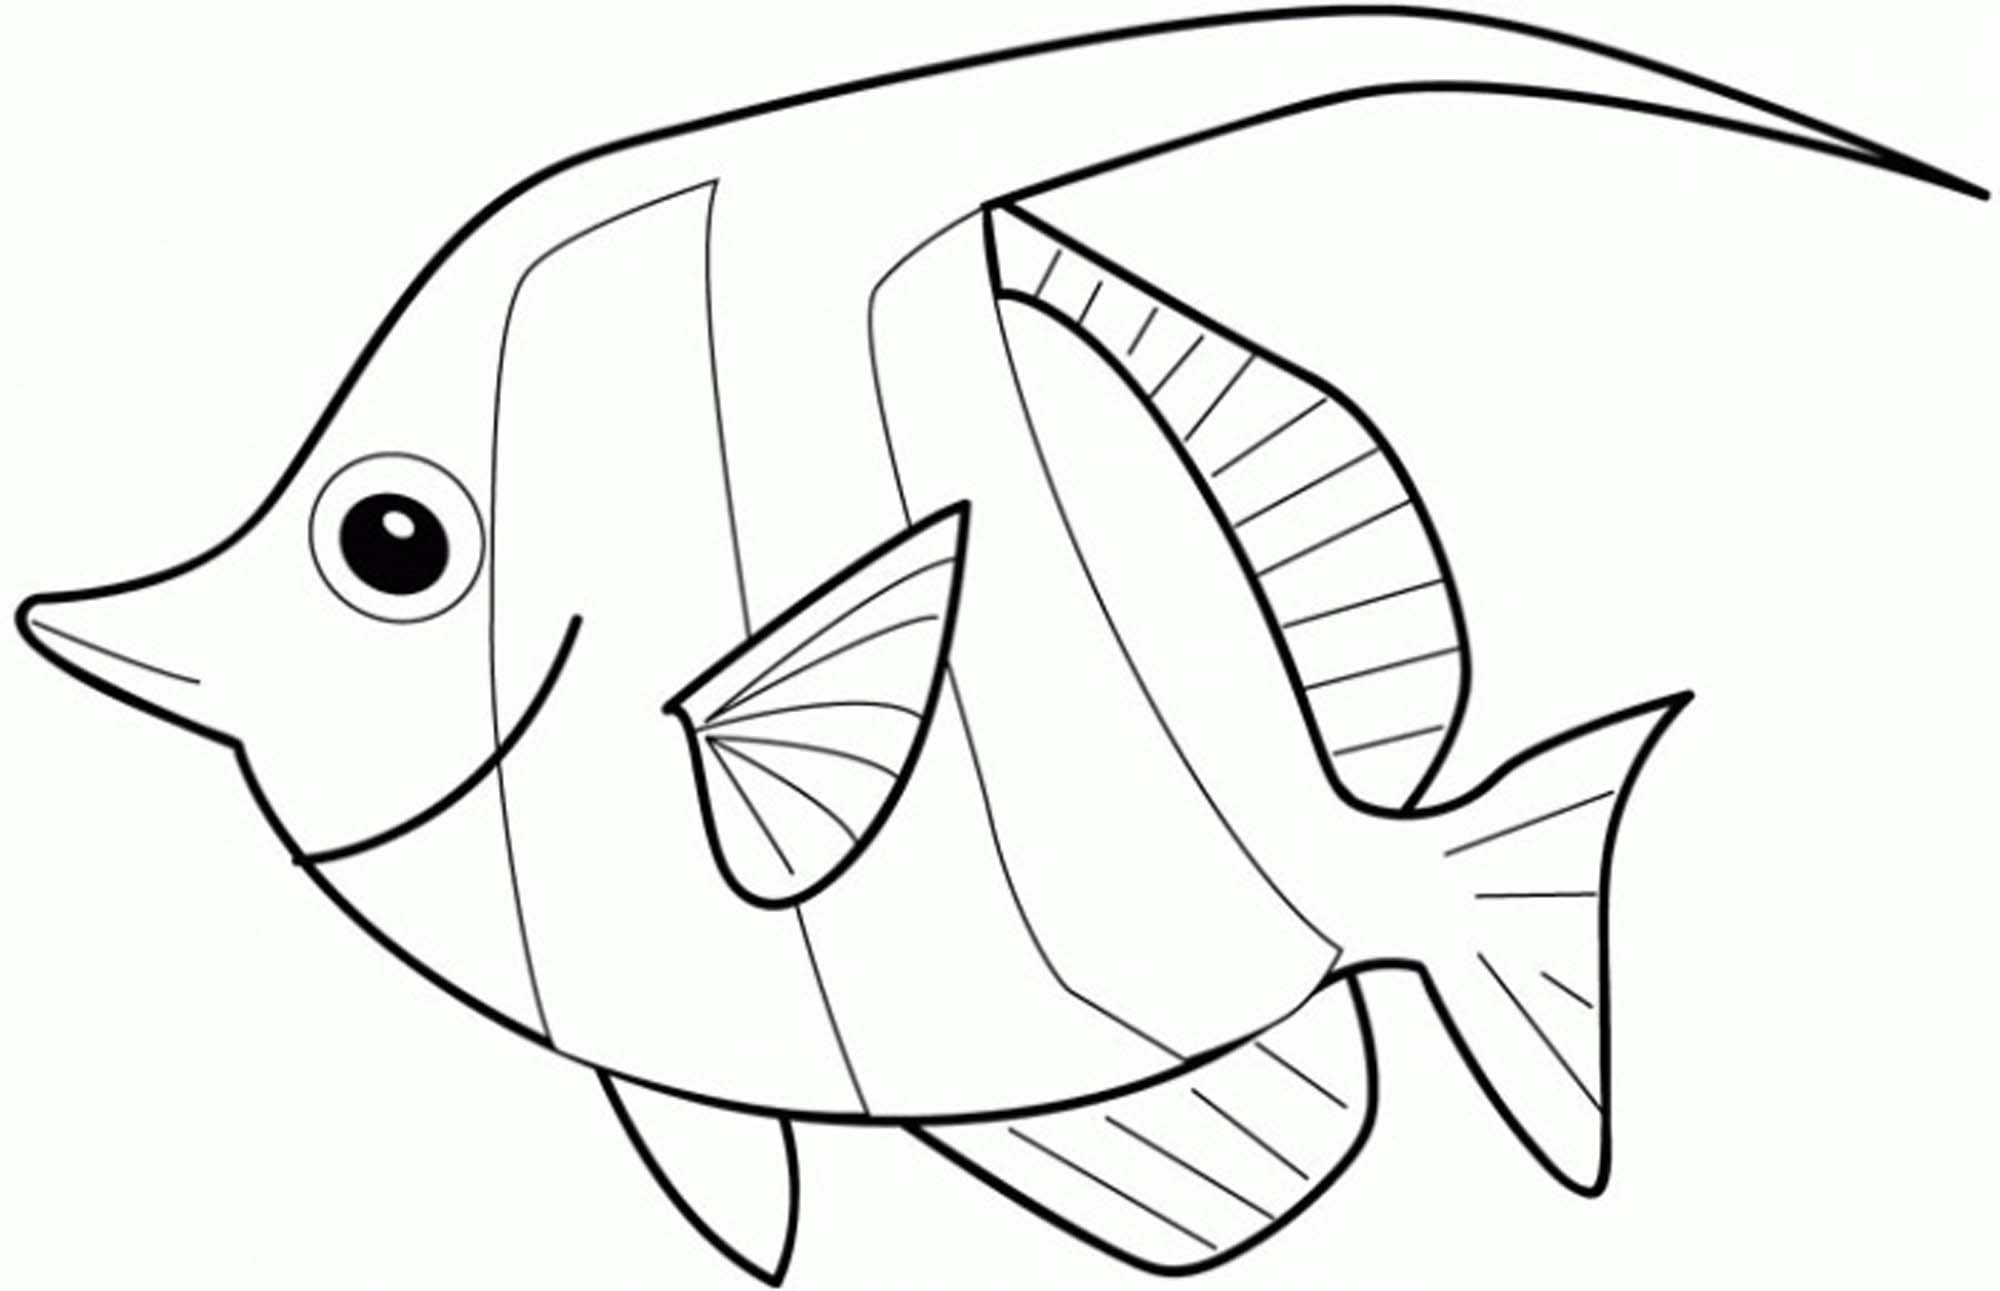 Download rainbow-fish-coloring-page | | BestAppsForKids.com